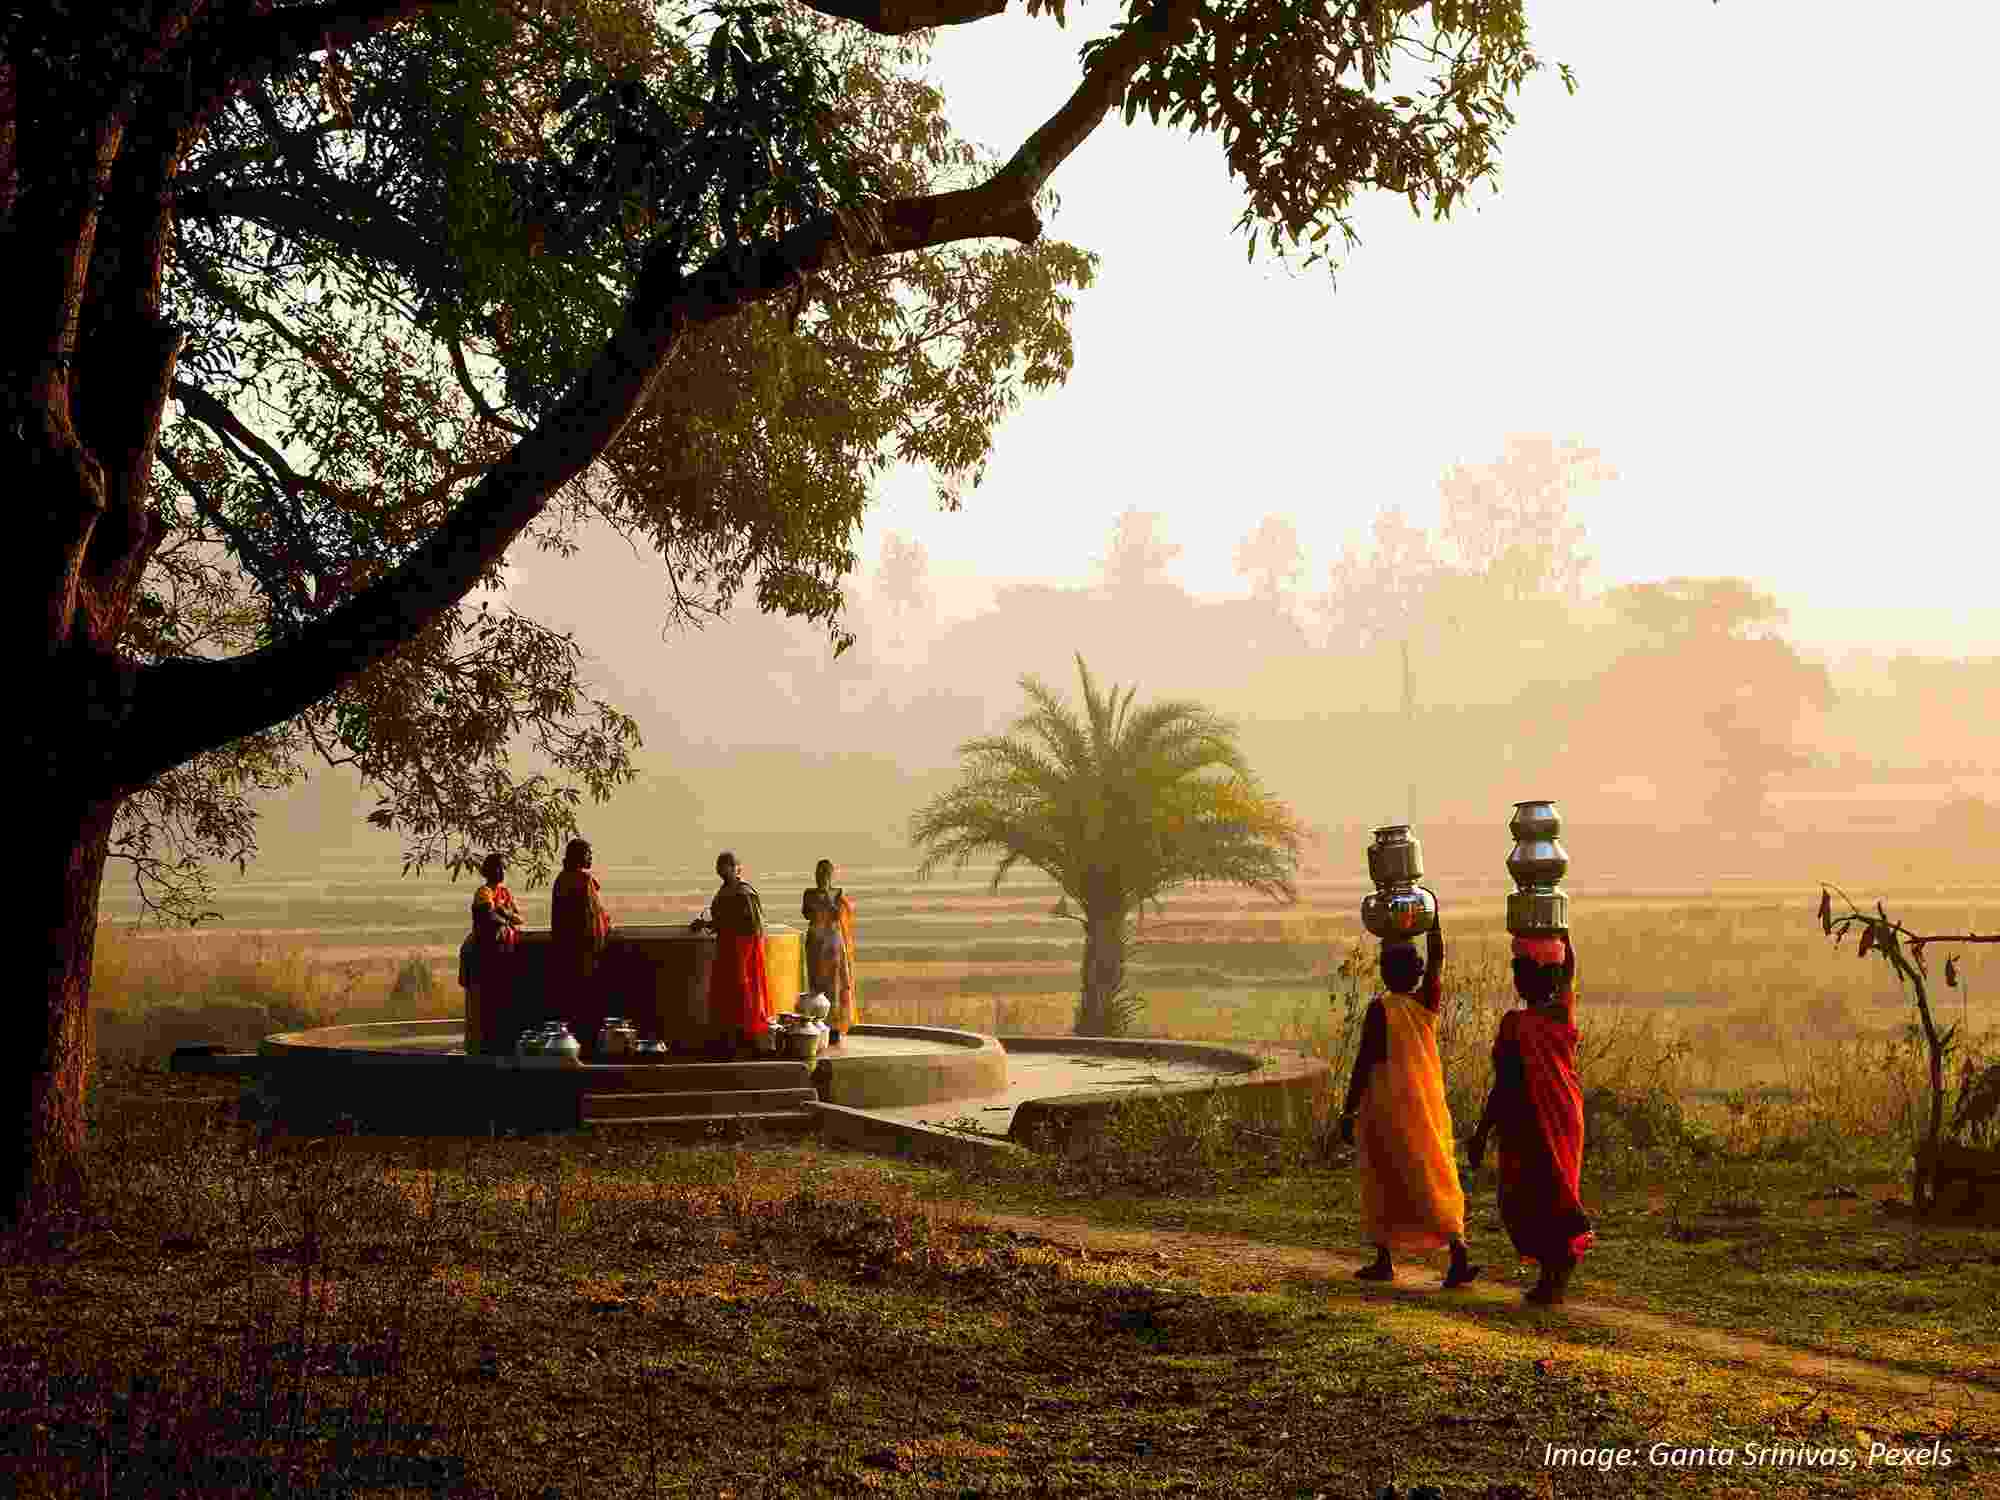 Several women dressed in orange and red on a hazy day, gathered round a groundwater well and carrying water in silver vessels on their heads